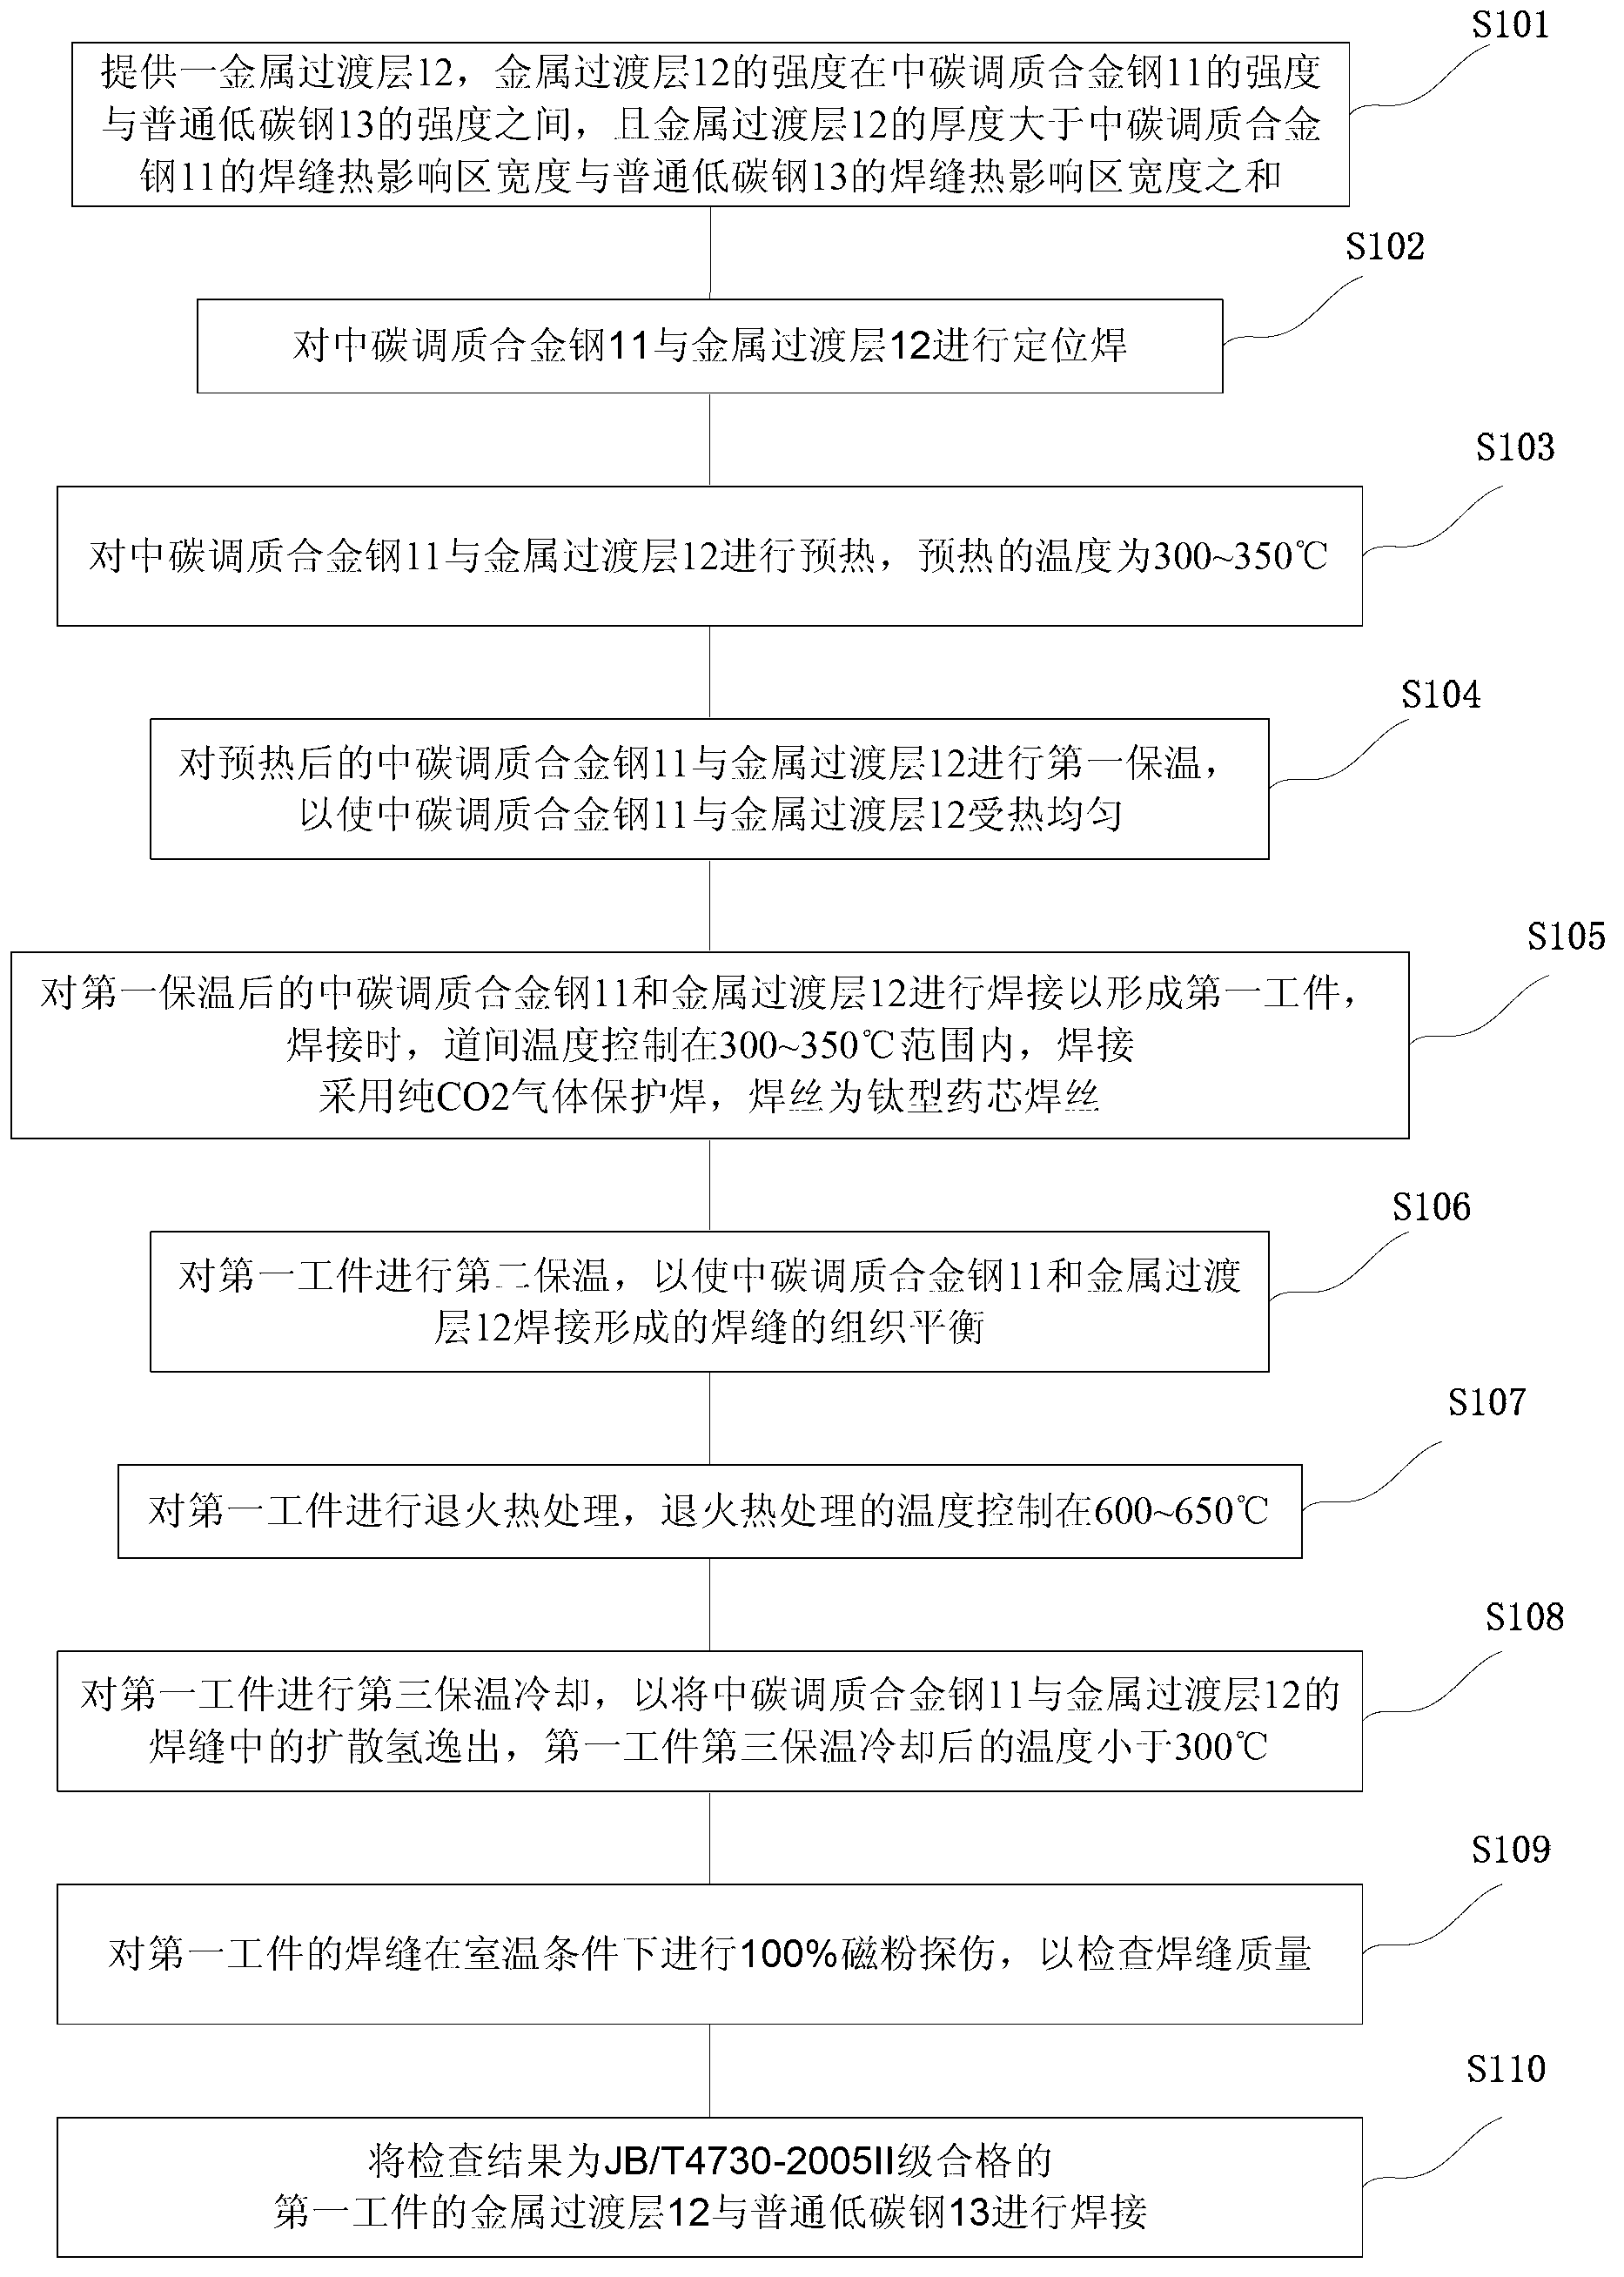 Method for welding medium-carbon quenched and tempered alloy steel and ordinary low-carbon steel